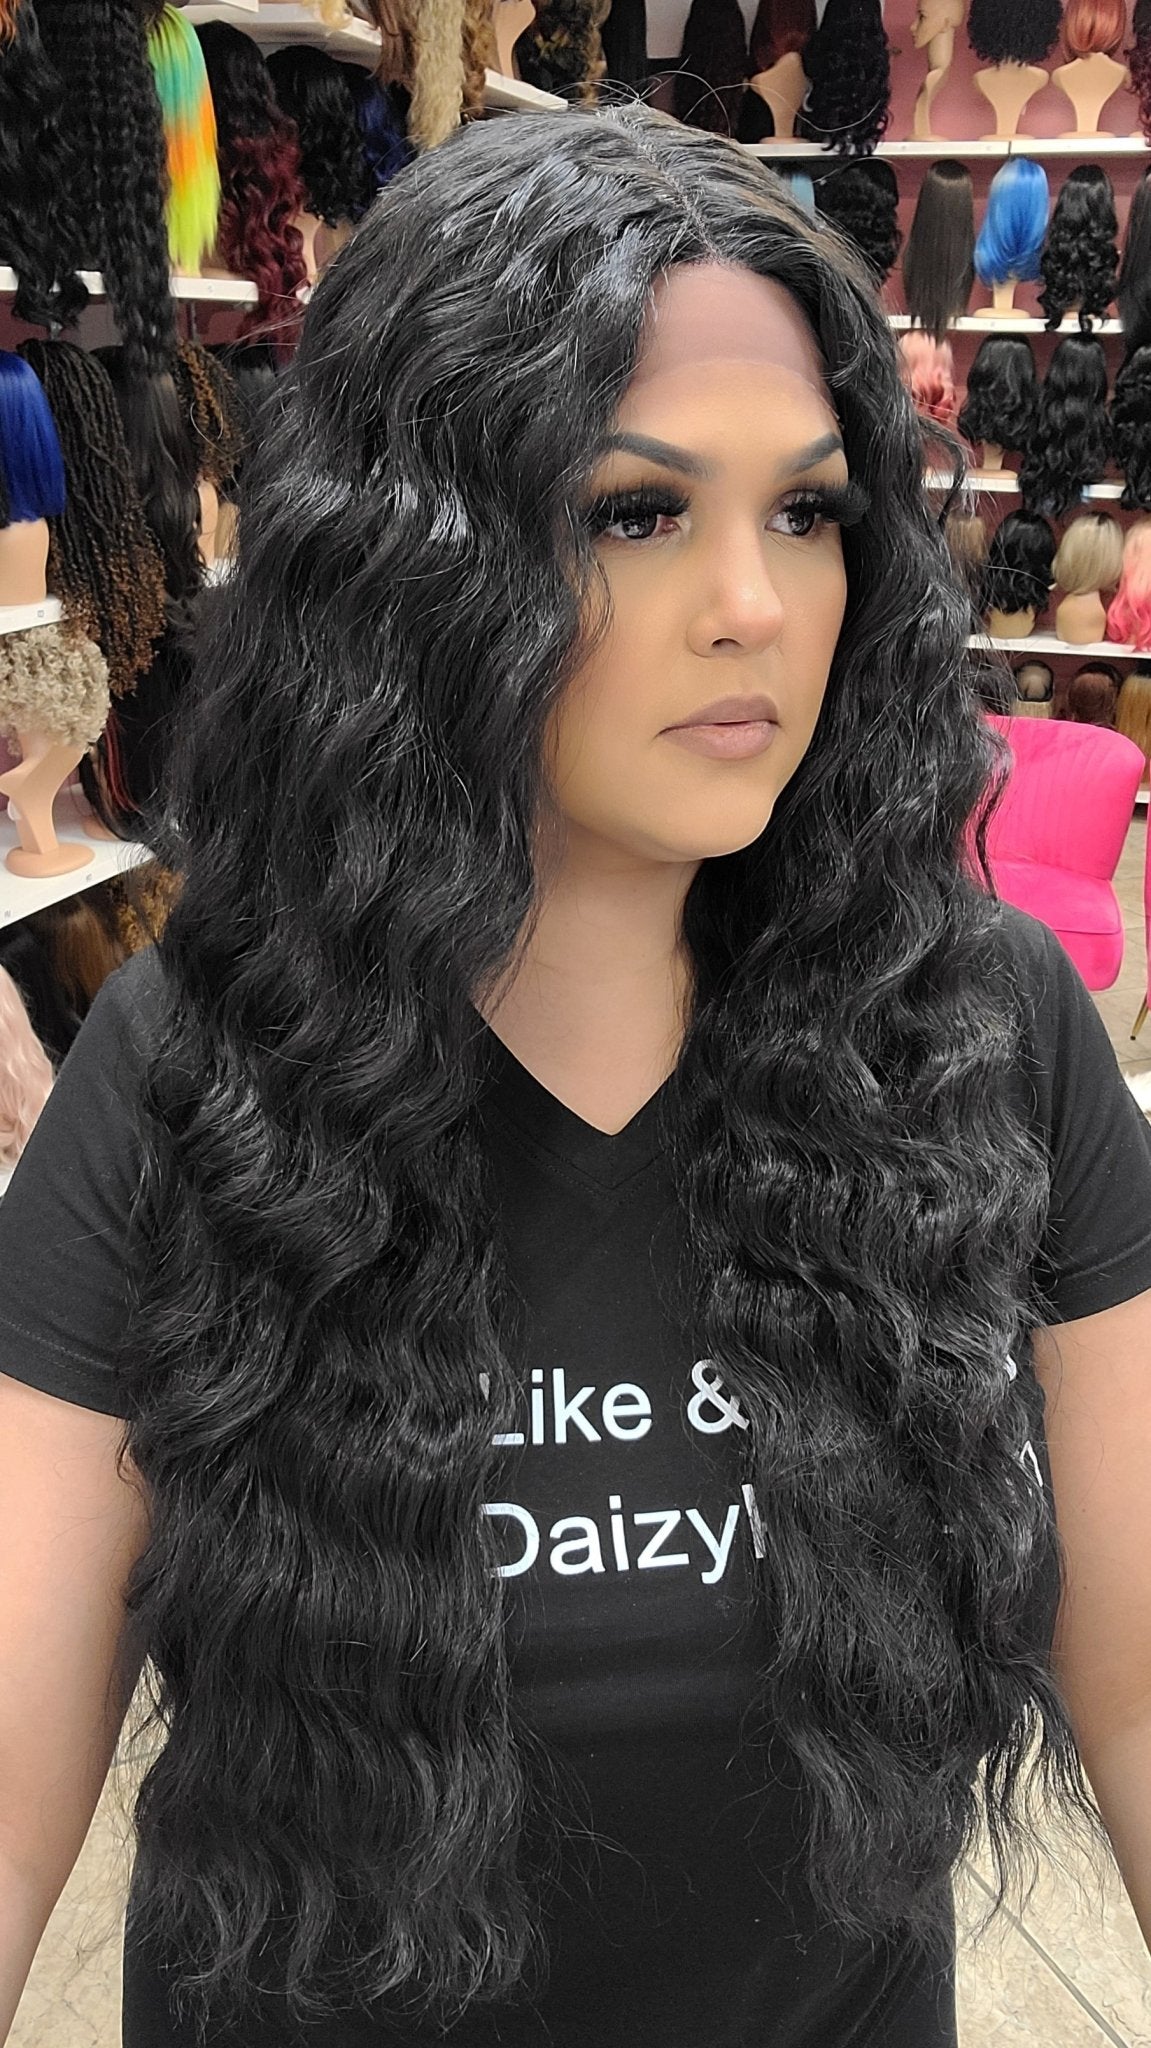 187 Marina - Deep Middle Part Lace Front Wig - 2 - DaizyKat Cosmetics 187 Marina - Deep Middle Part Lace Front Wig - 2 DaizyKat Cosmetics Wigs